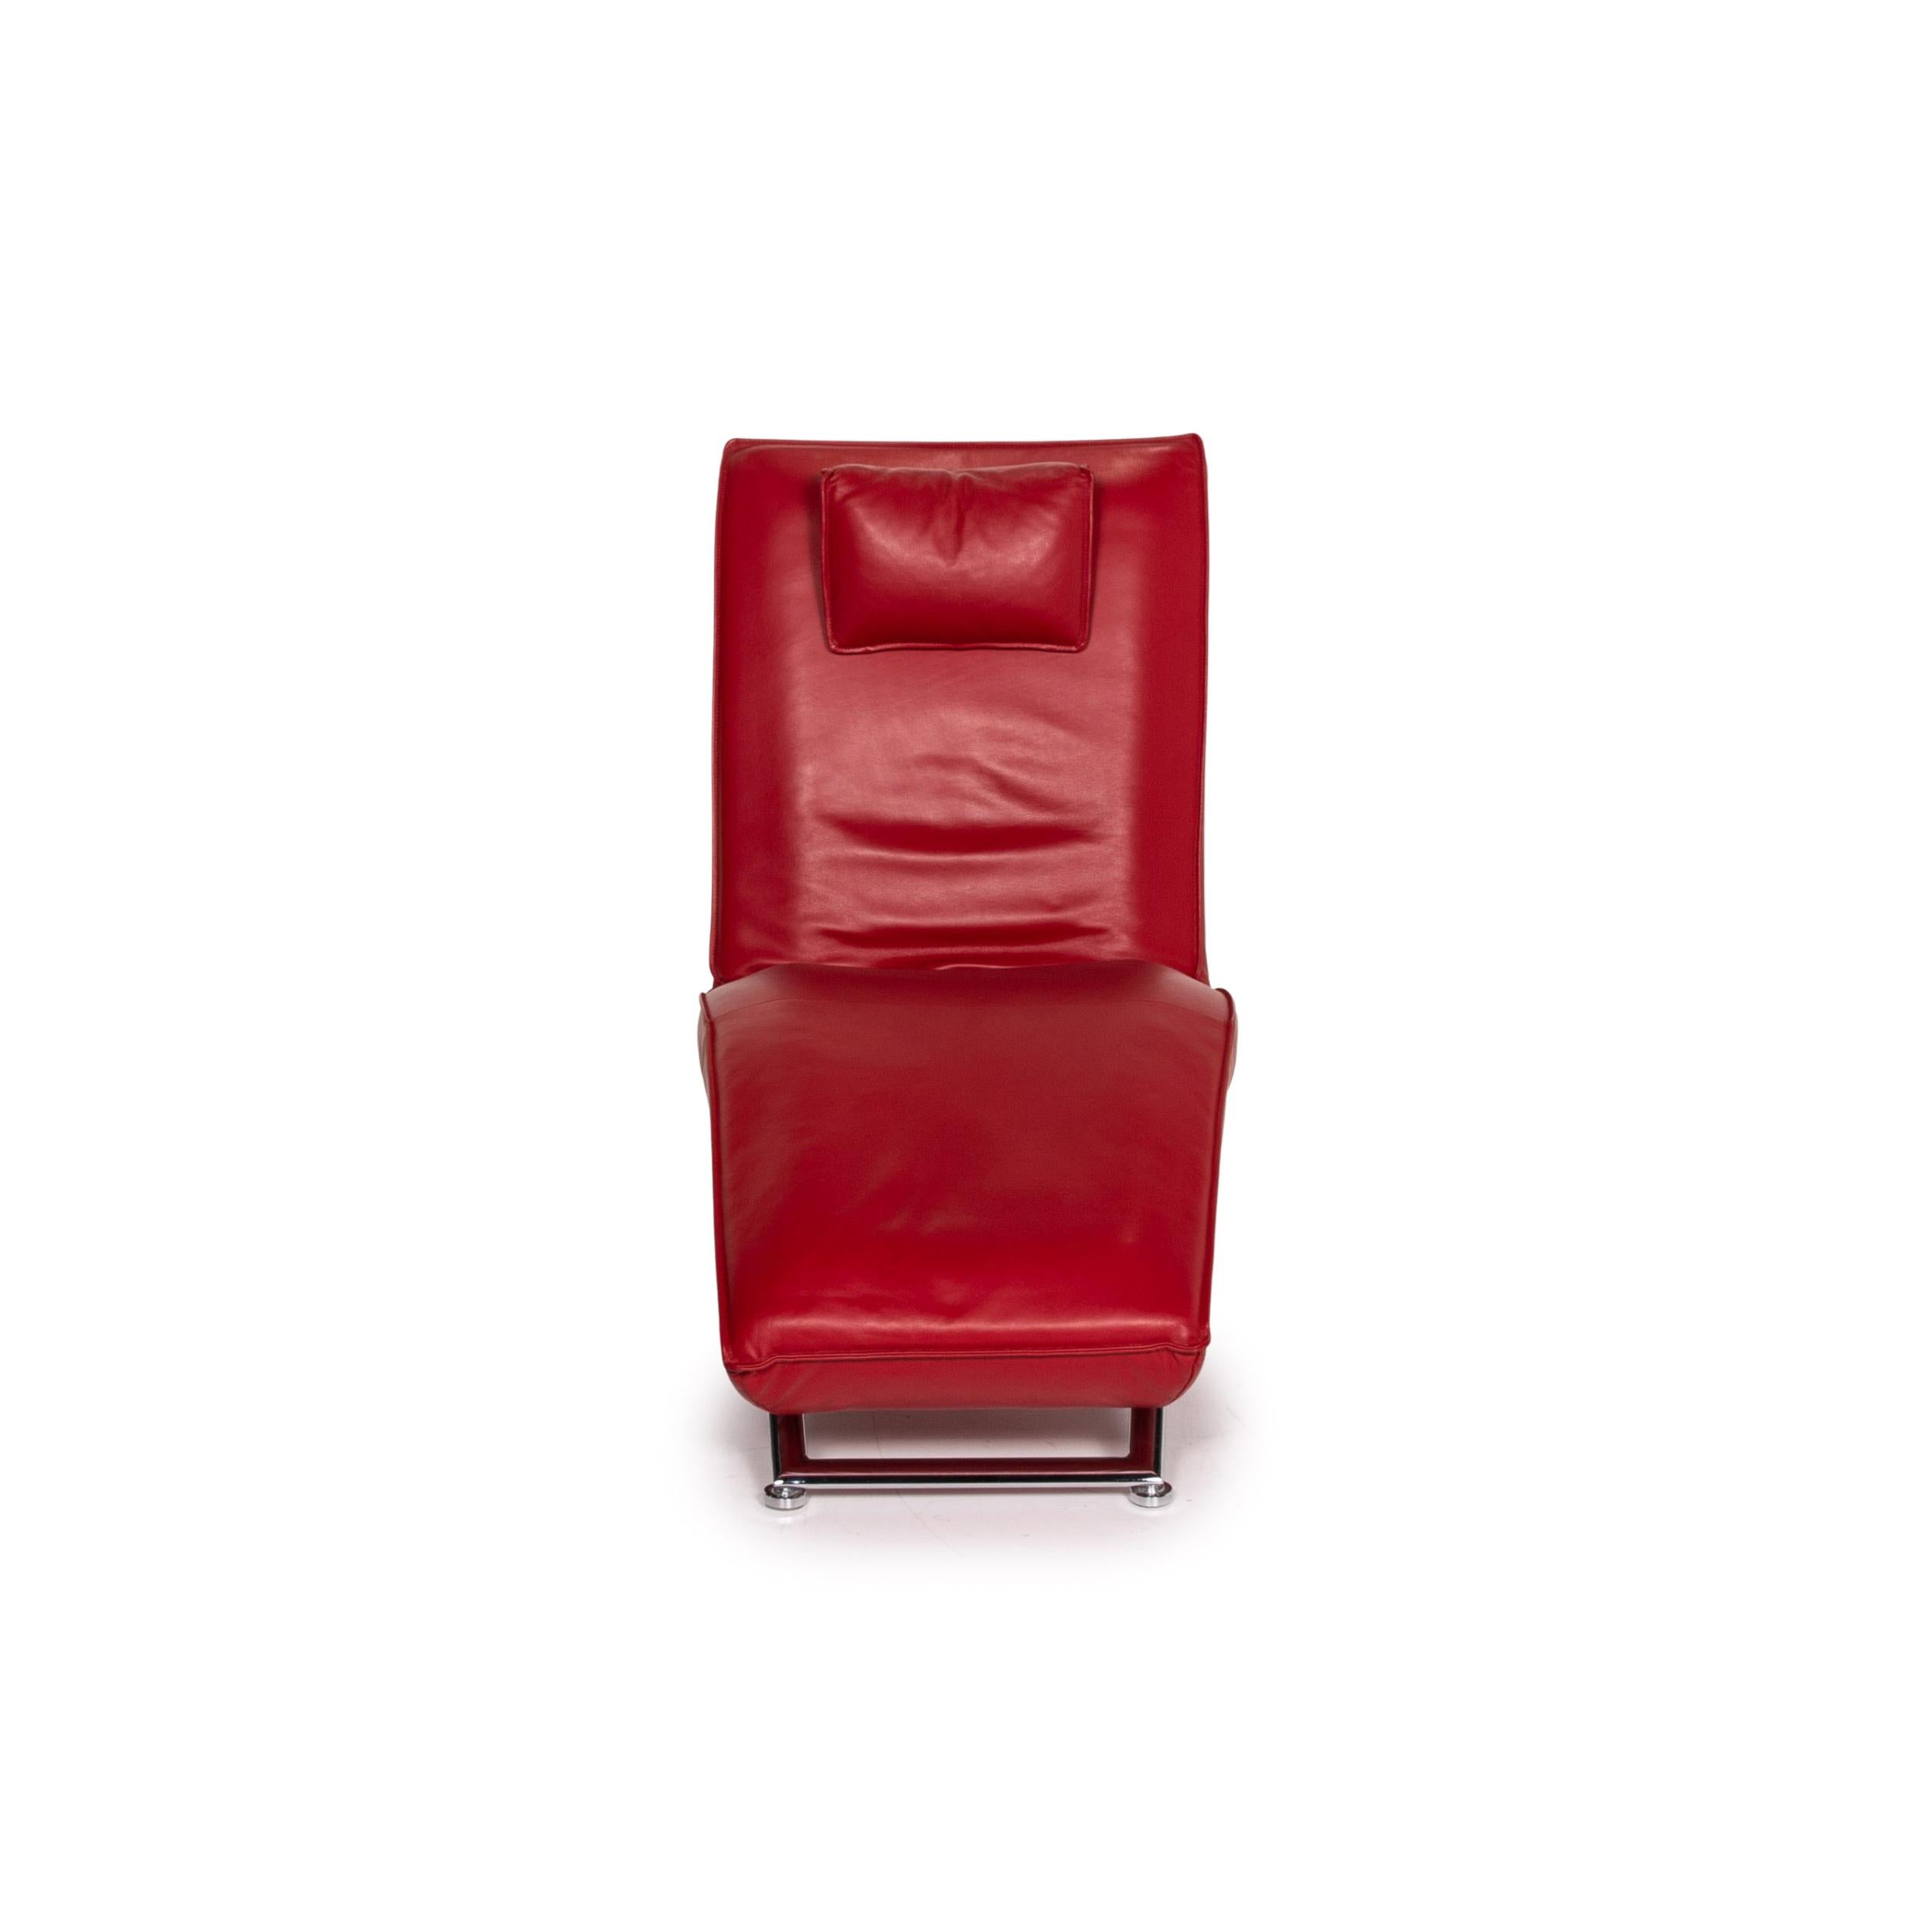 KoinorJeremiah Leather Lounger Red Relaxation Function Relaxation Lounger 2